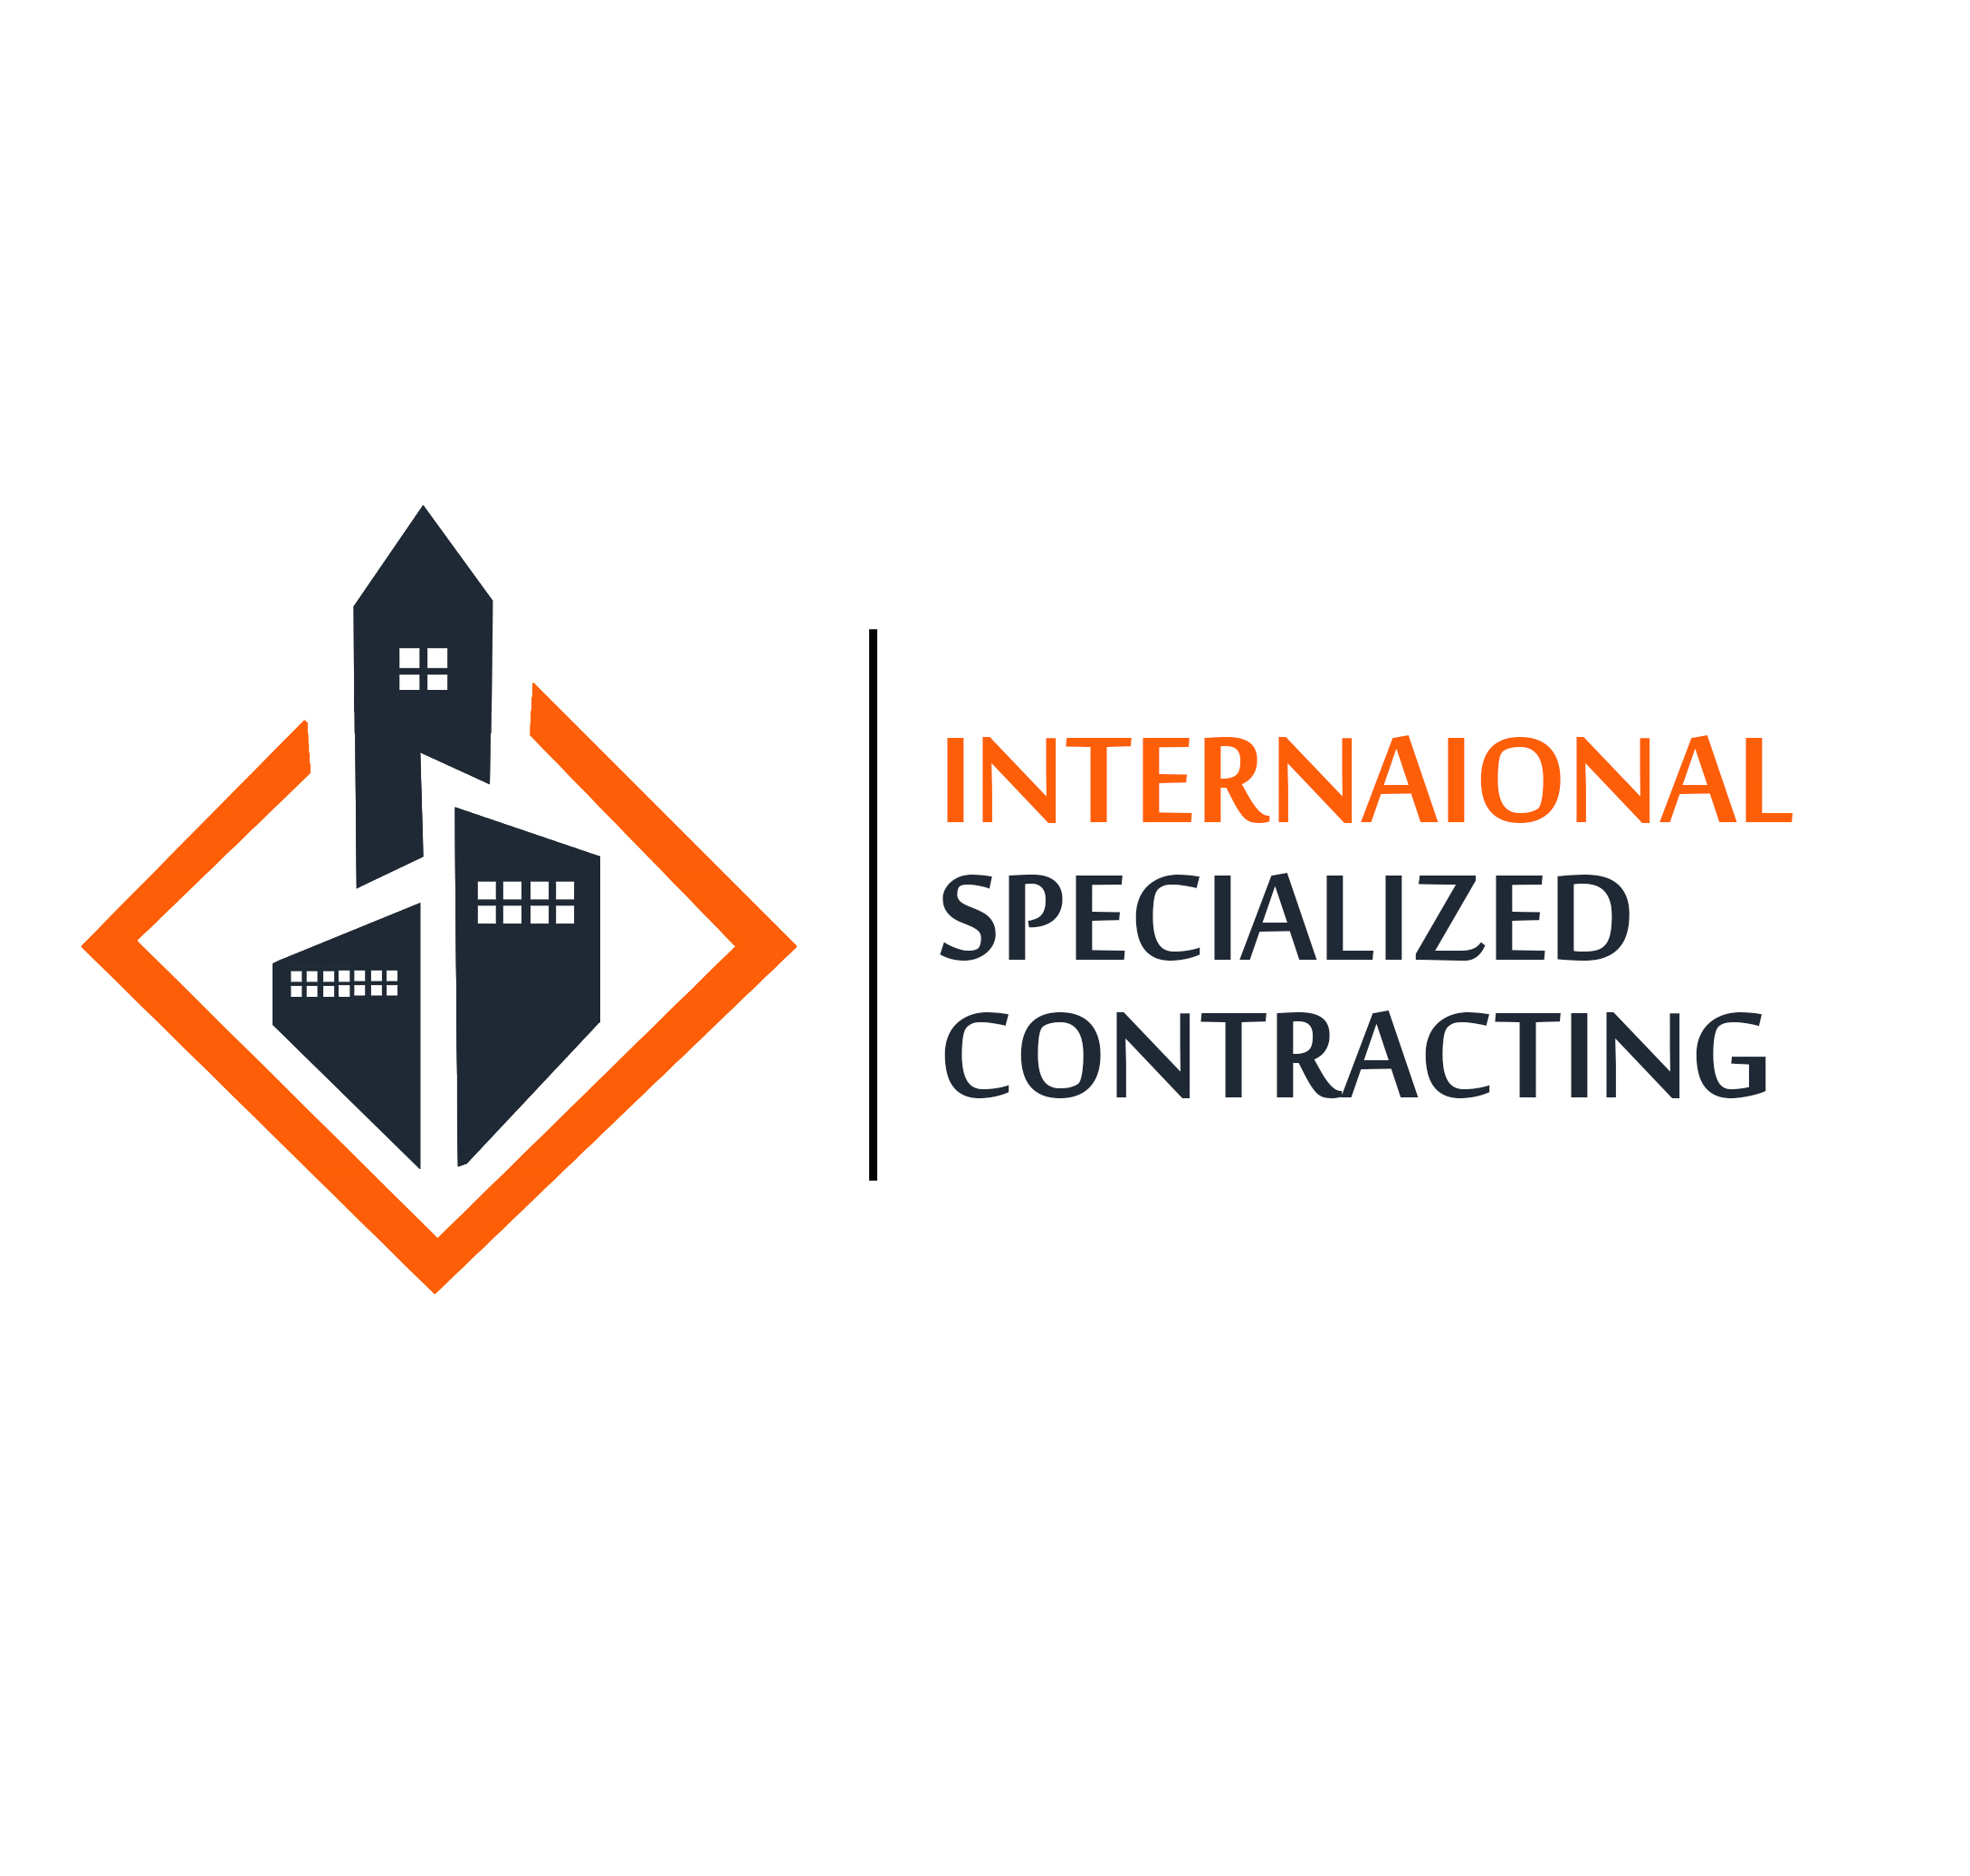 International Specialized Contracting Company